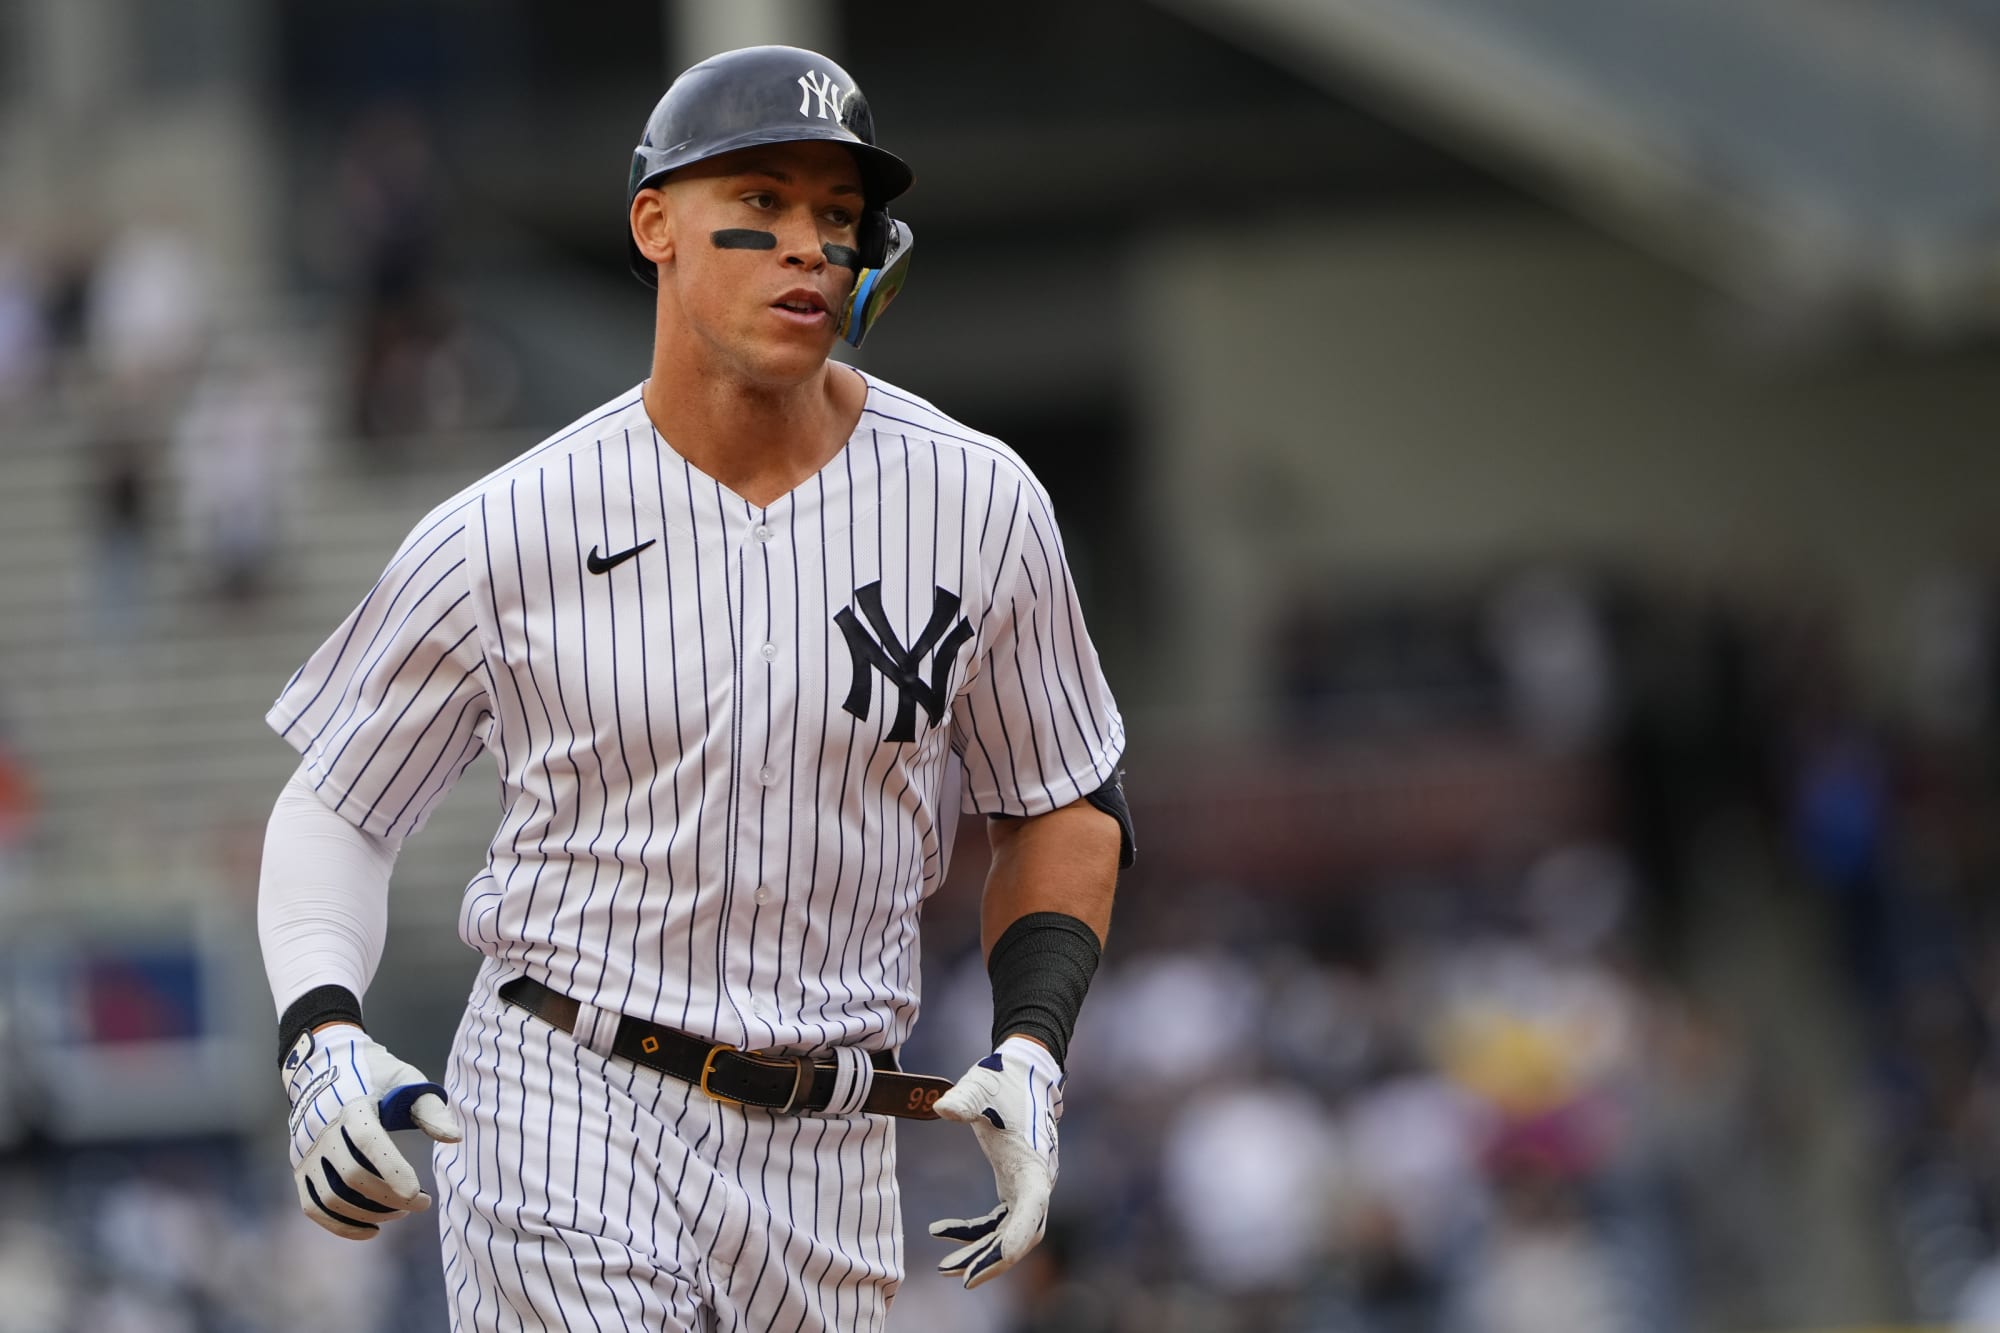 Rumor: SF Giants pivoting to star shortstop after missing out on Aaron Judge